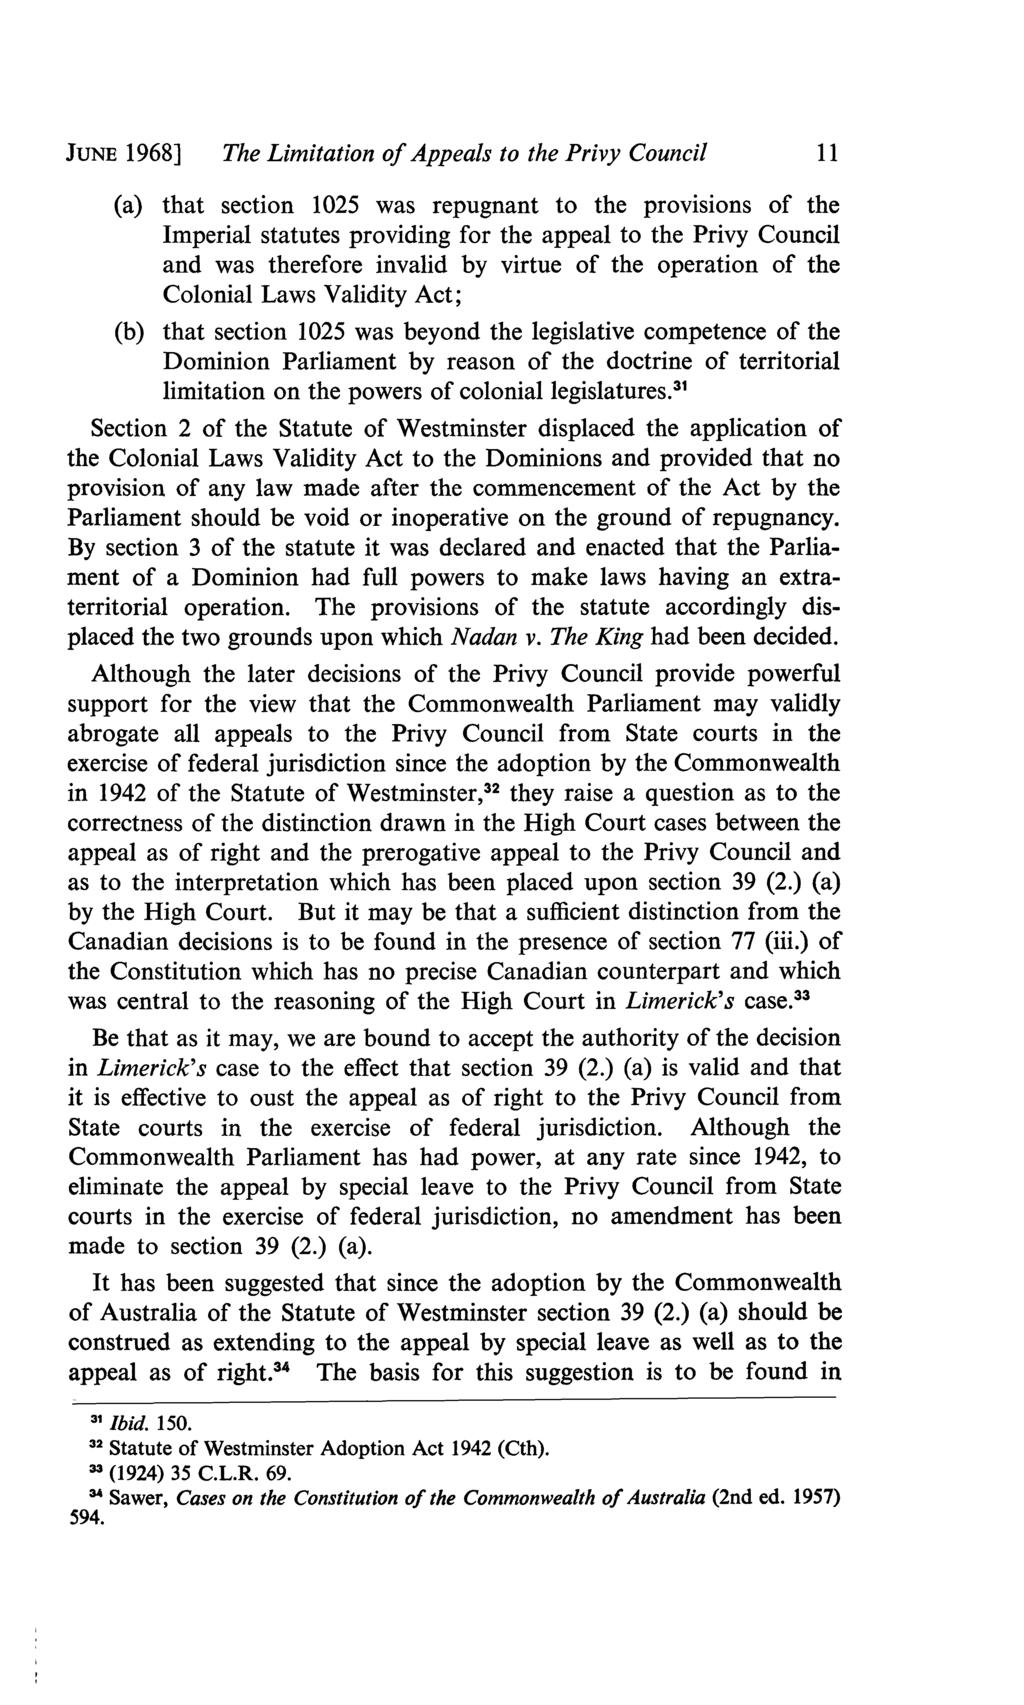 JUNE 1968] The Limitation of Appeals to the Privy Council 11 (a) (b) that section 1025 was repugnant to the provisions of the Imperial statutes providing for the appeal to the Privy Council and was